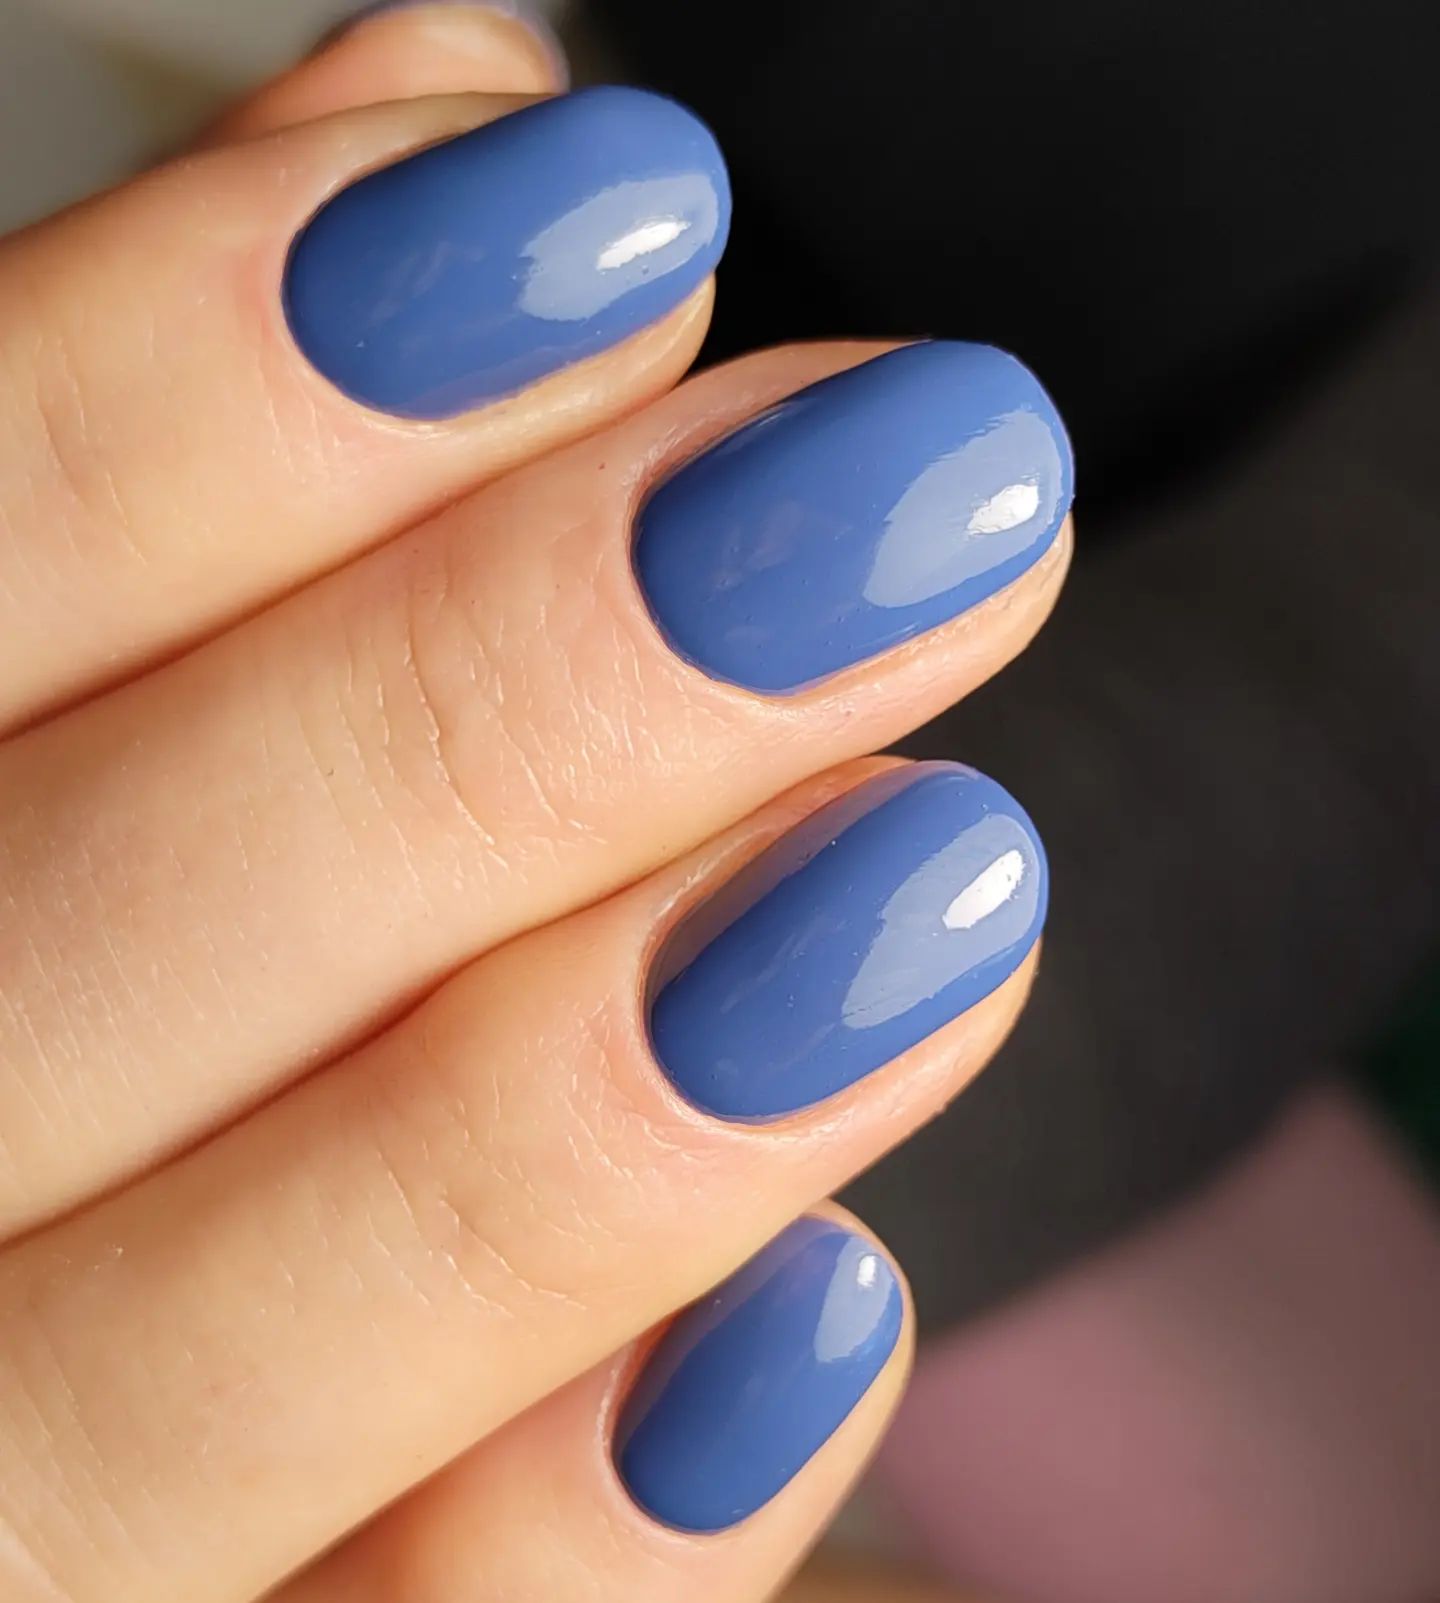 Classic blue nail polish has been around for a very long time since it offers a great look. Blue is beautiful, peaceful and soothing color that reminds you of the sky and the sea. Plus, it doesn't matter if you have short or long oval nails since you will shine no matter what.